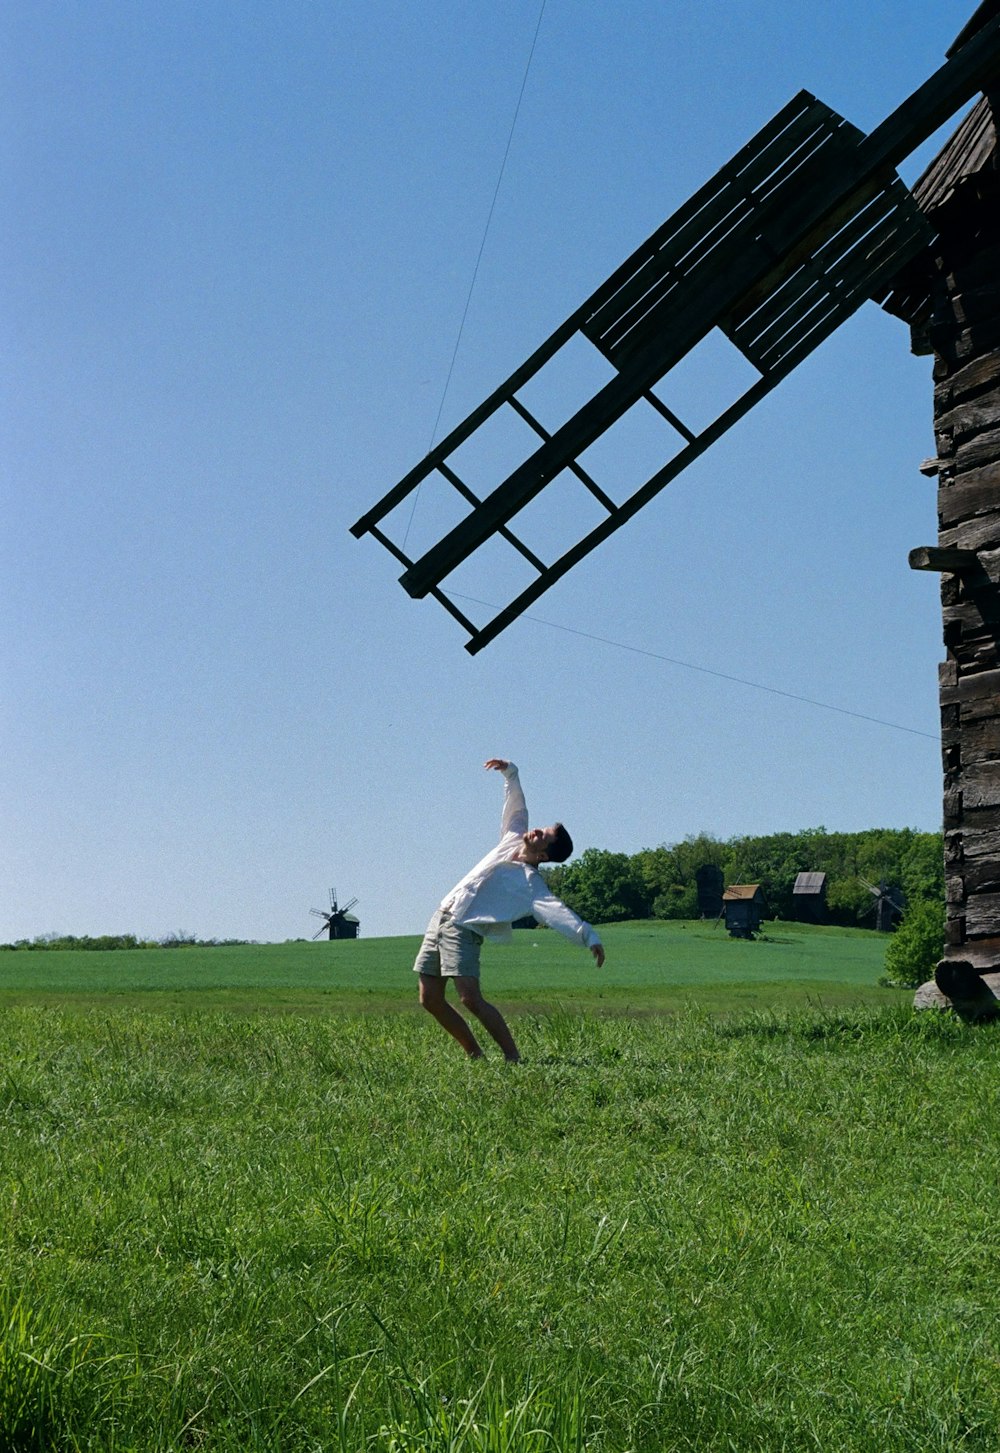 a man flying a kite over a lush green field